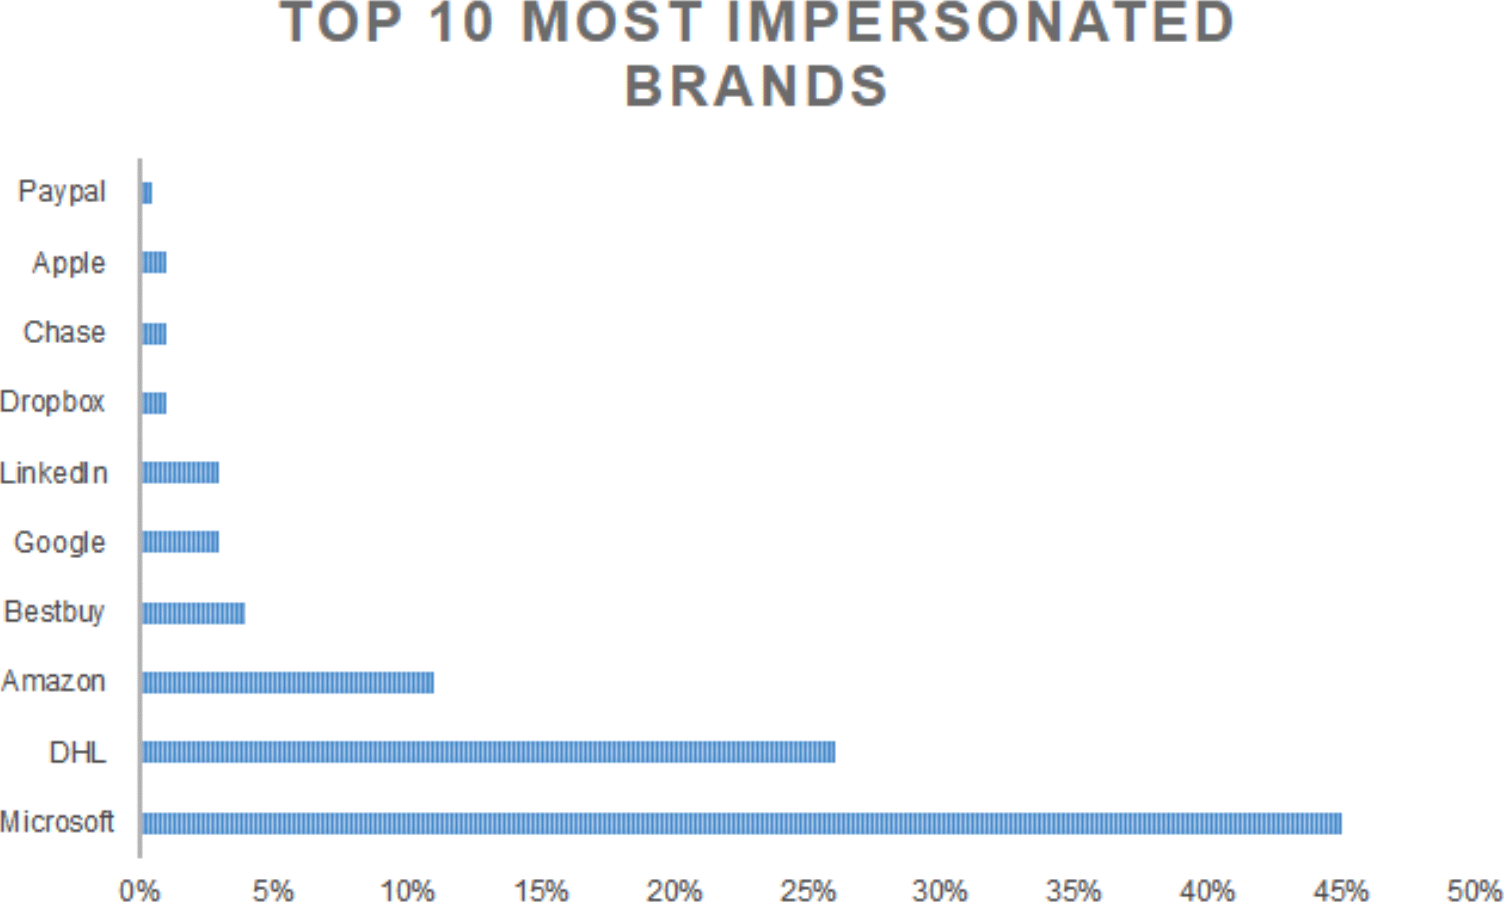 Q2 2021 Top 10 Most Impersonated Brands in Domains 20